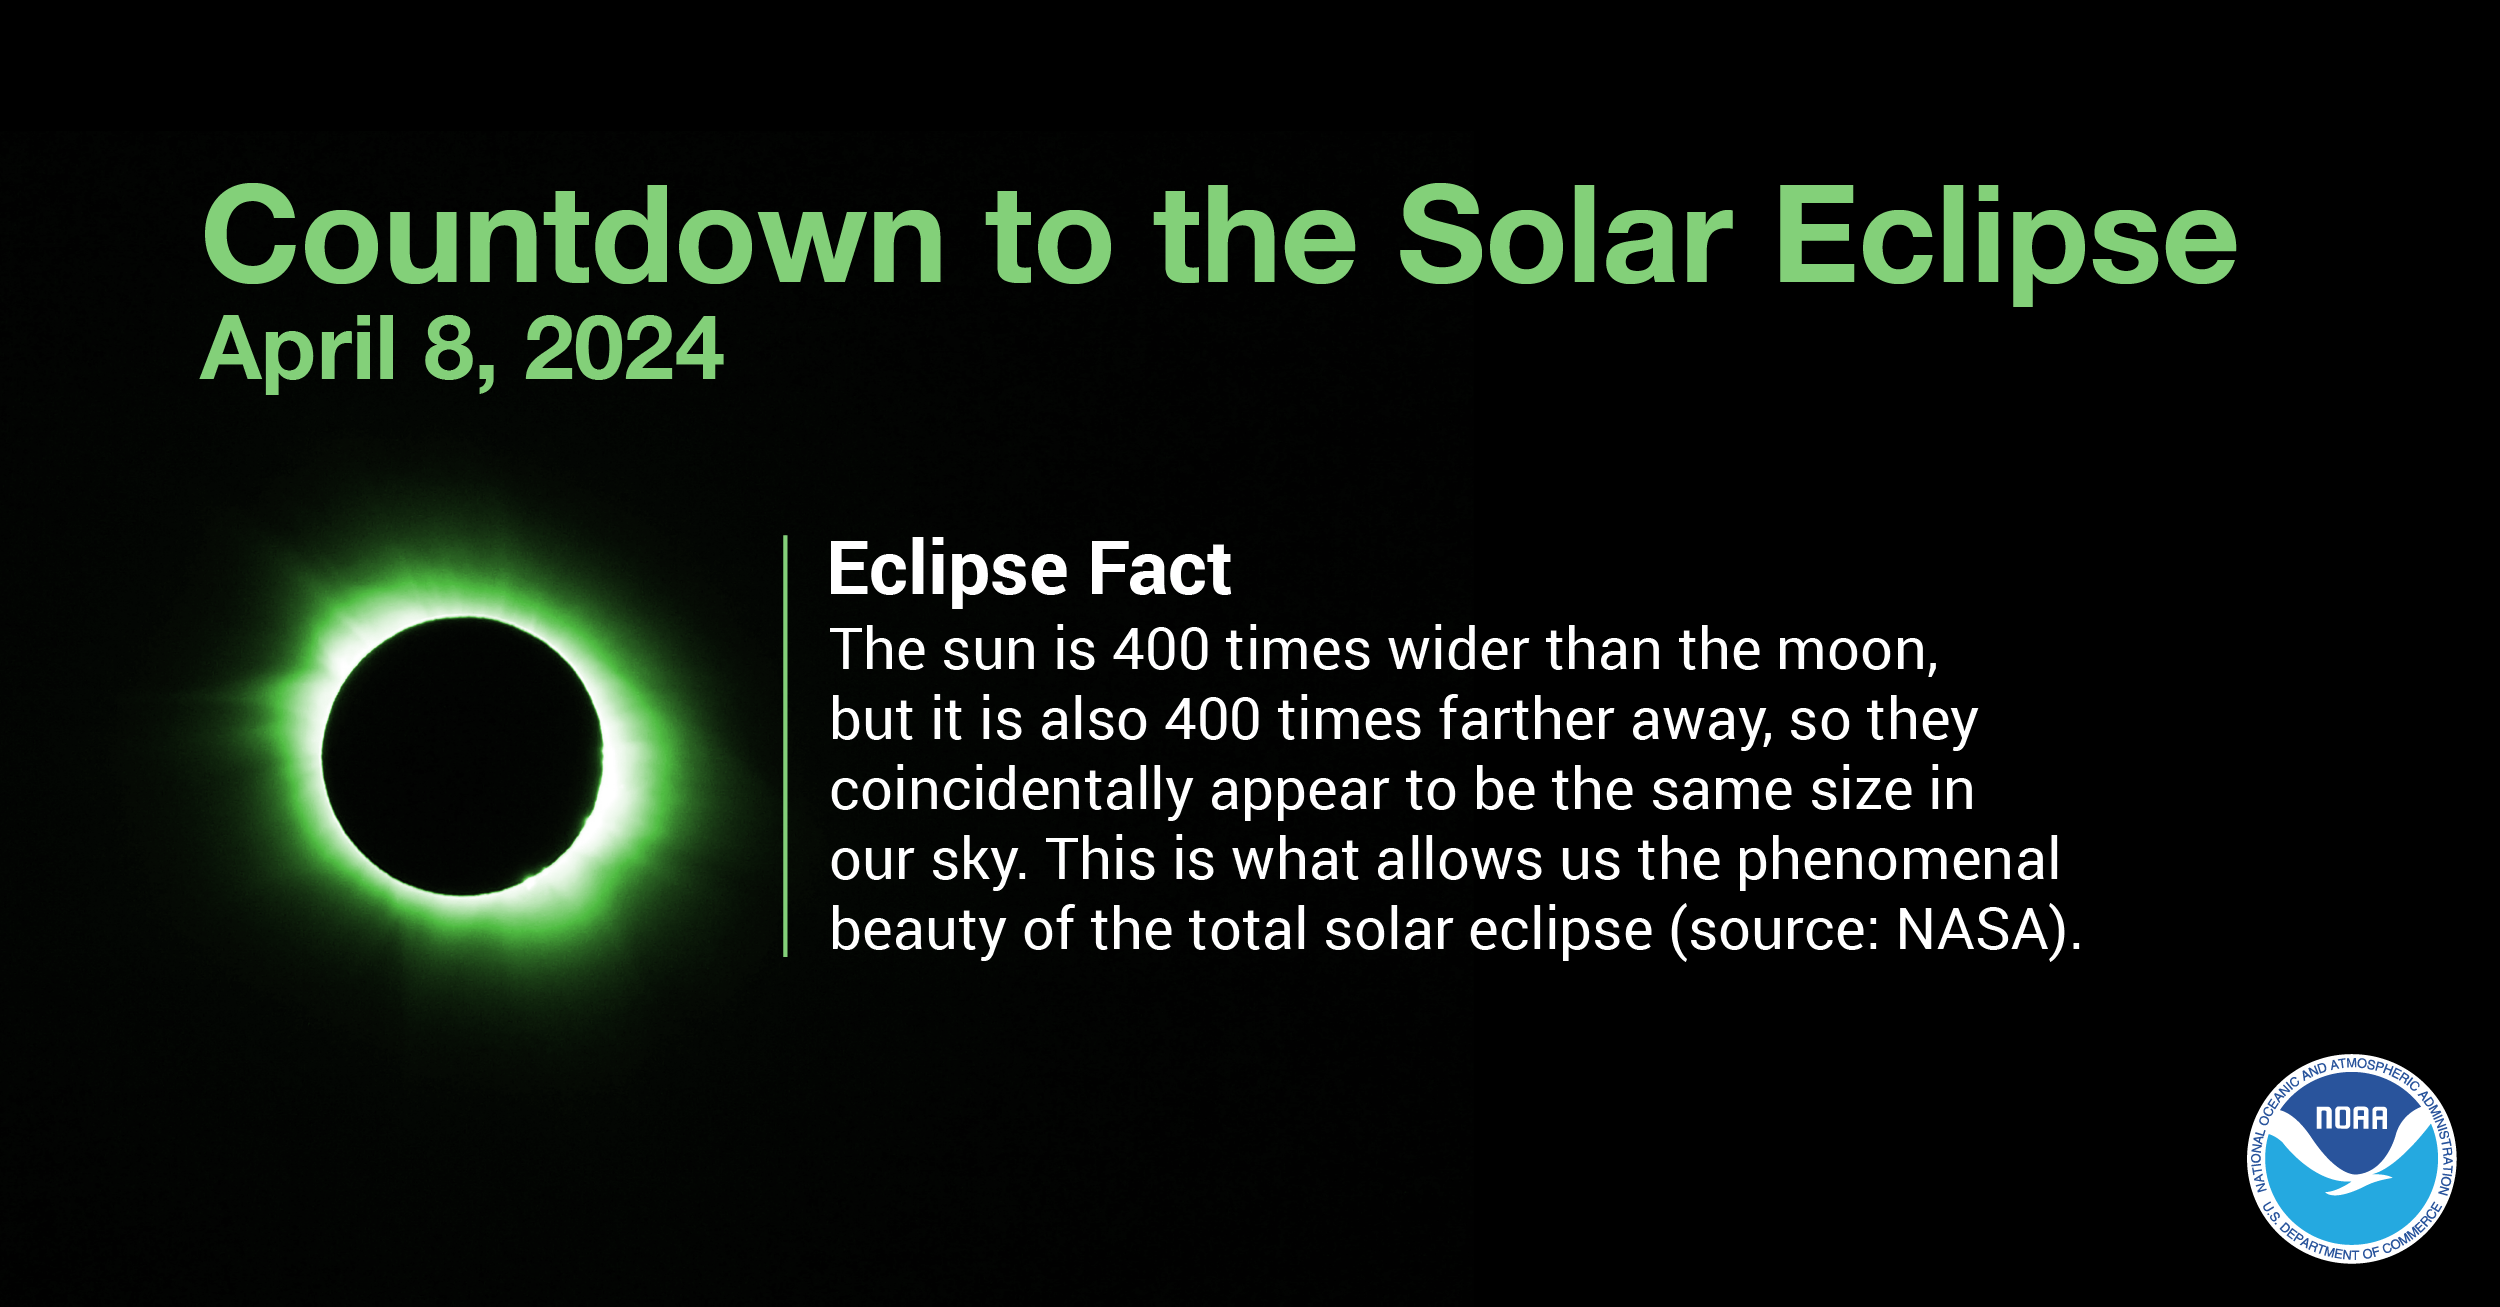 Eclipse Fact 1